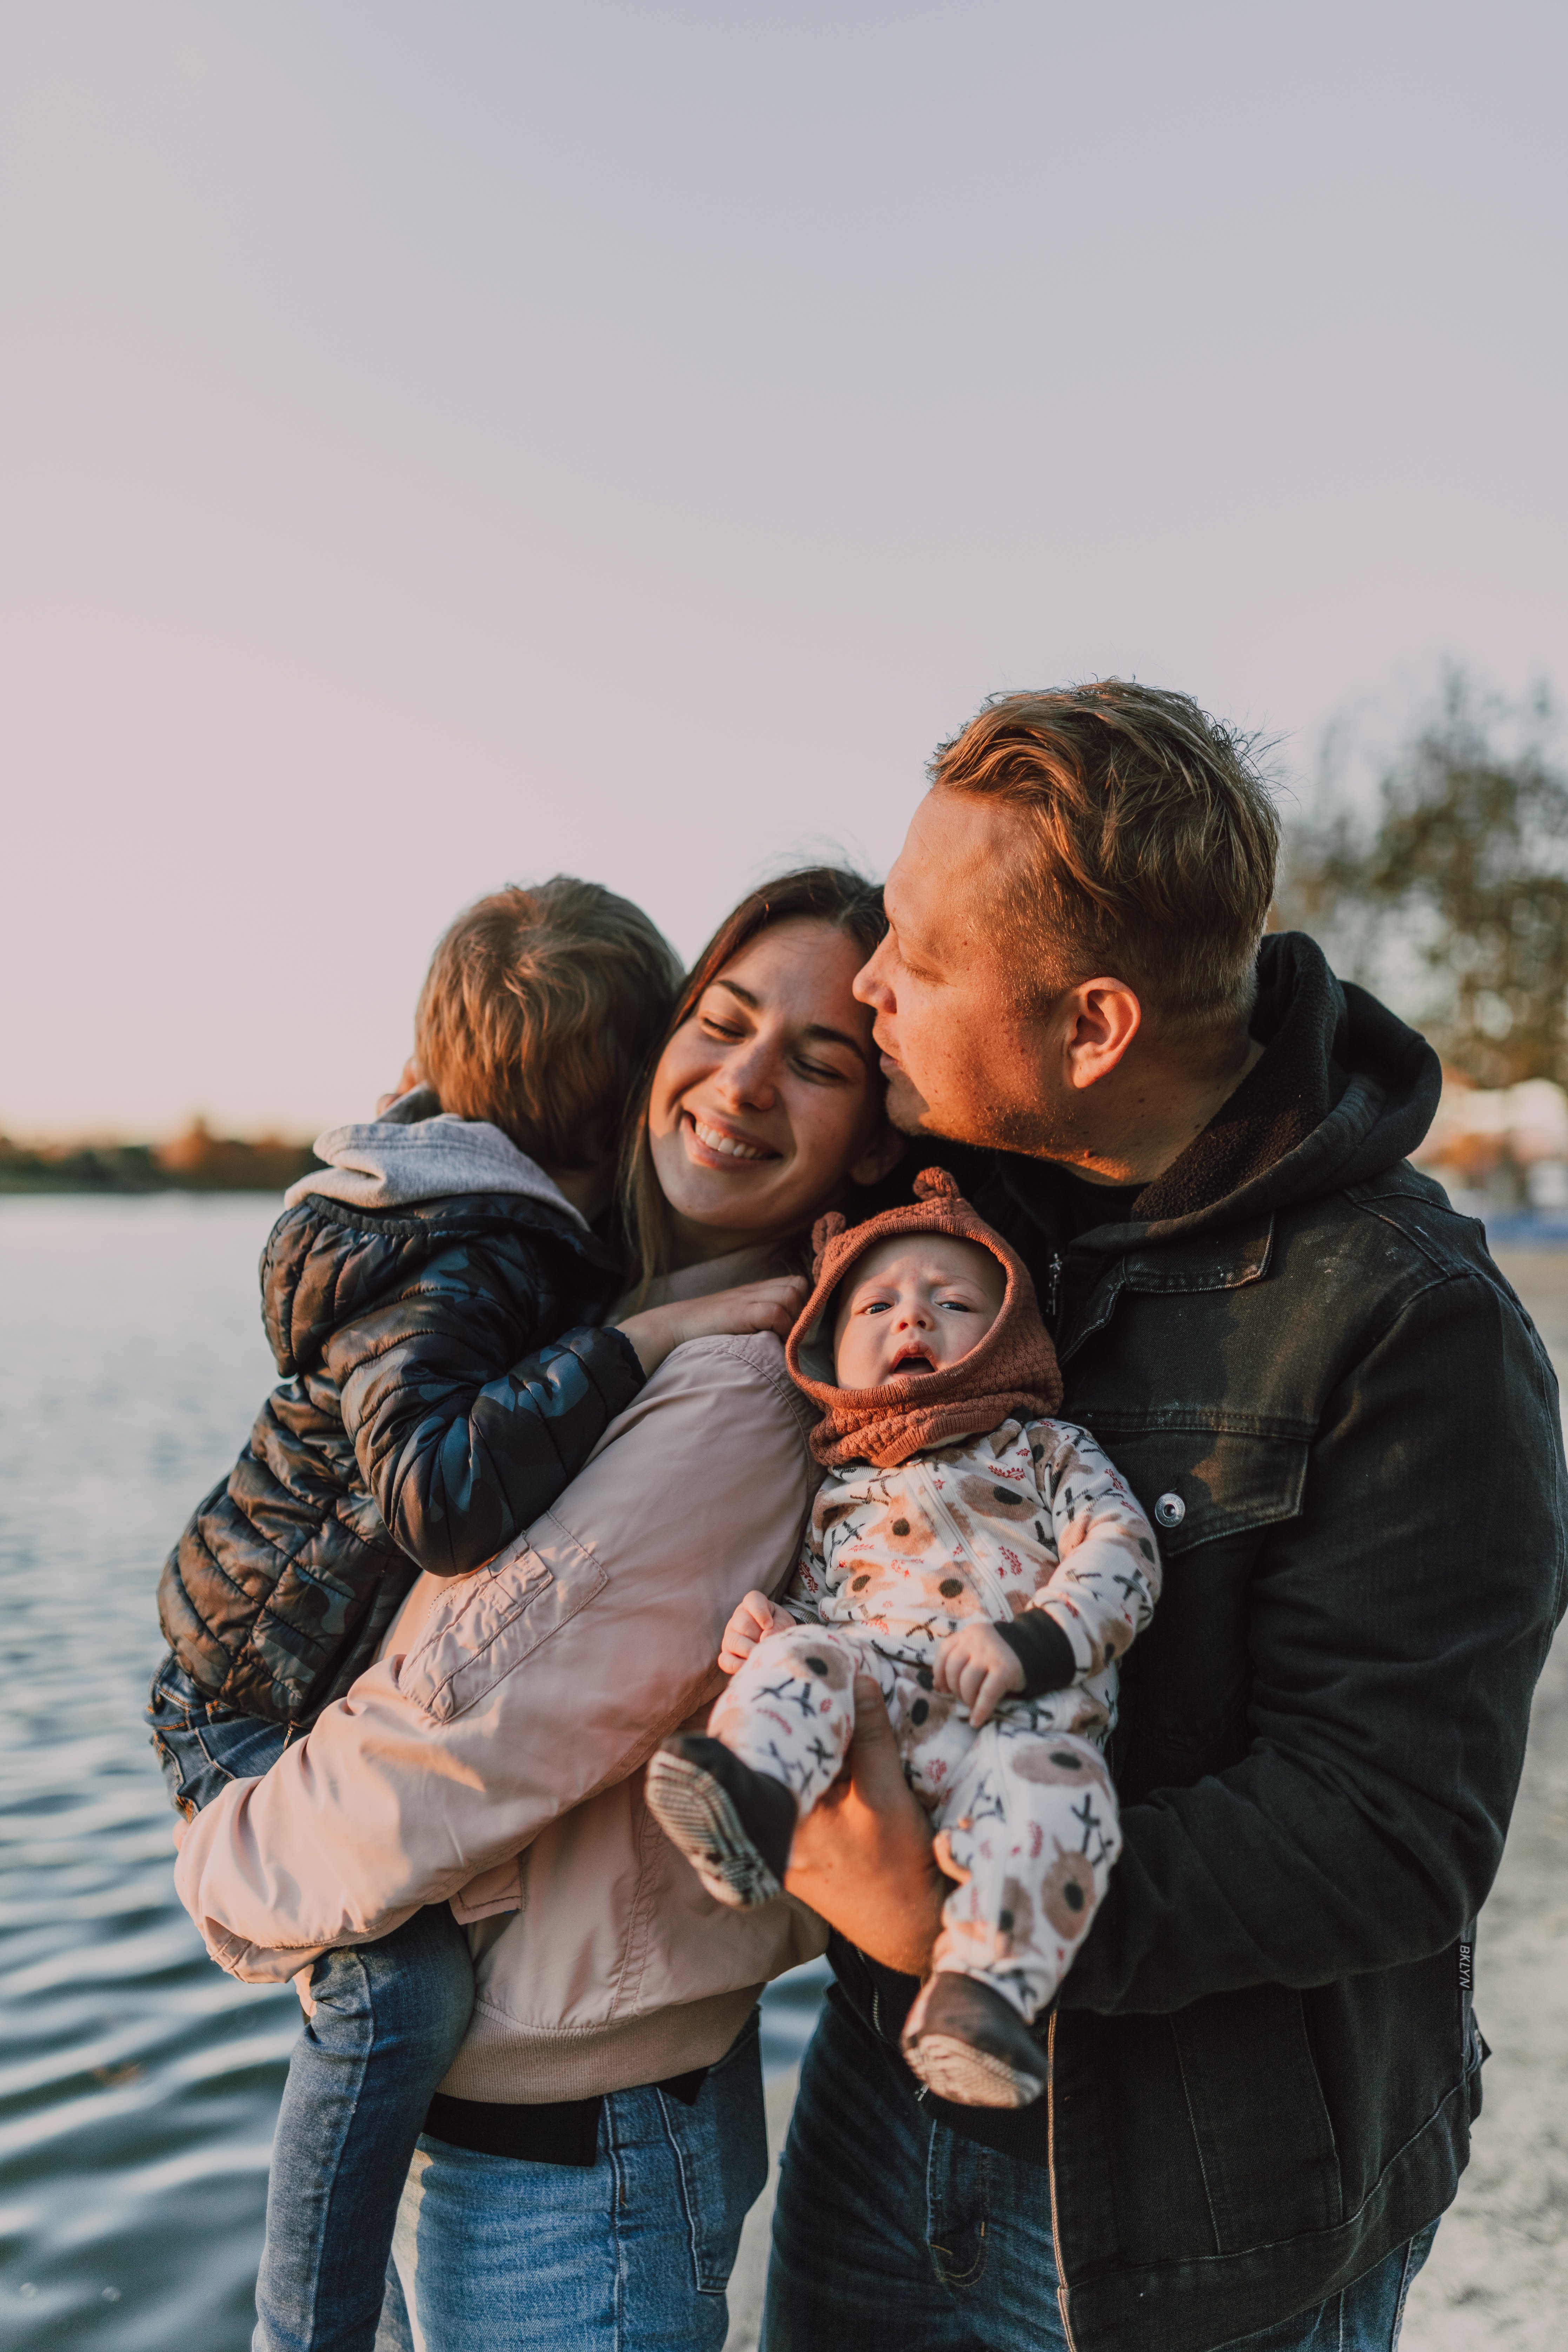 A couple with two children outdoors | Source: Pexels